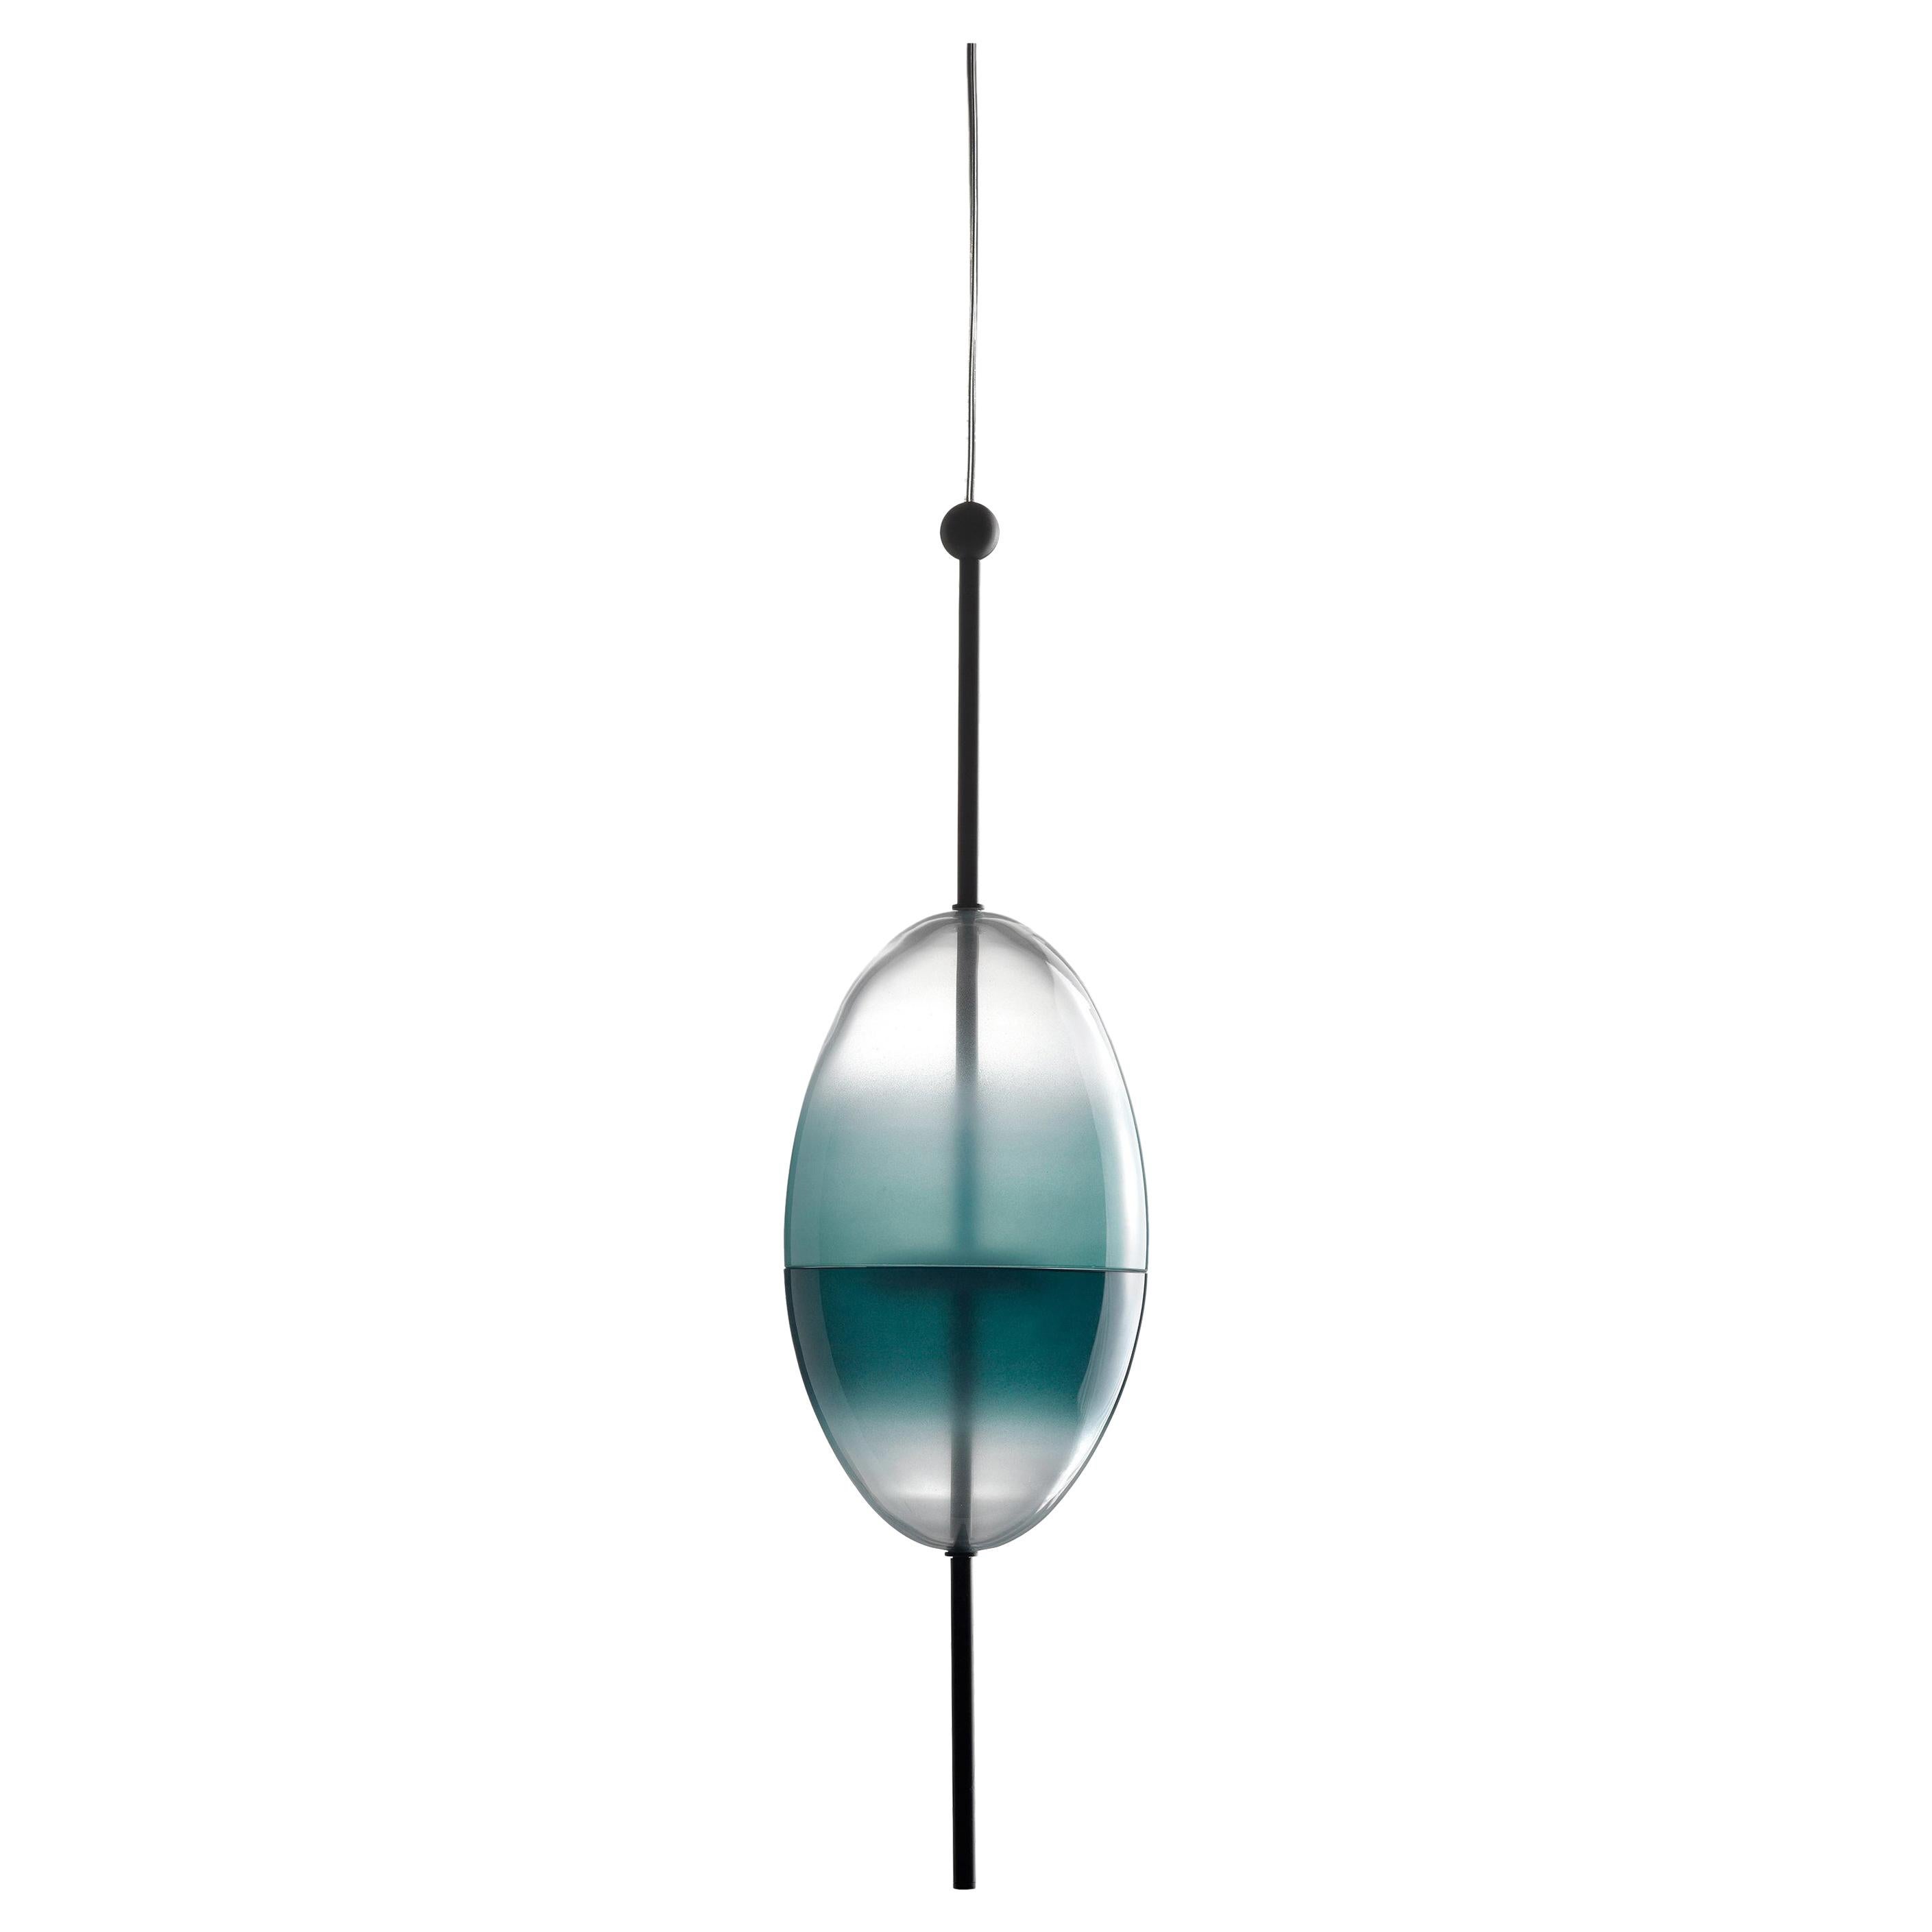 Flow[T] S1 by Nao Tamura — Murano Blown Glass Pendant Lamp For Sale